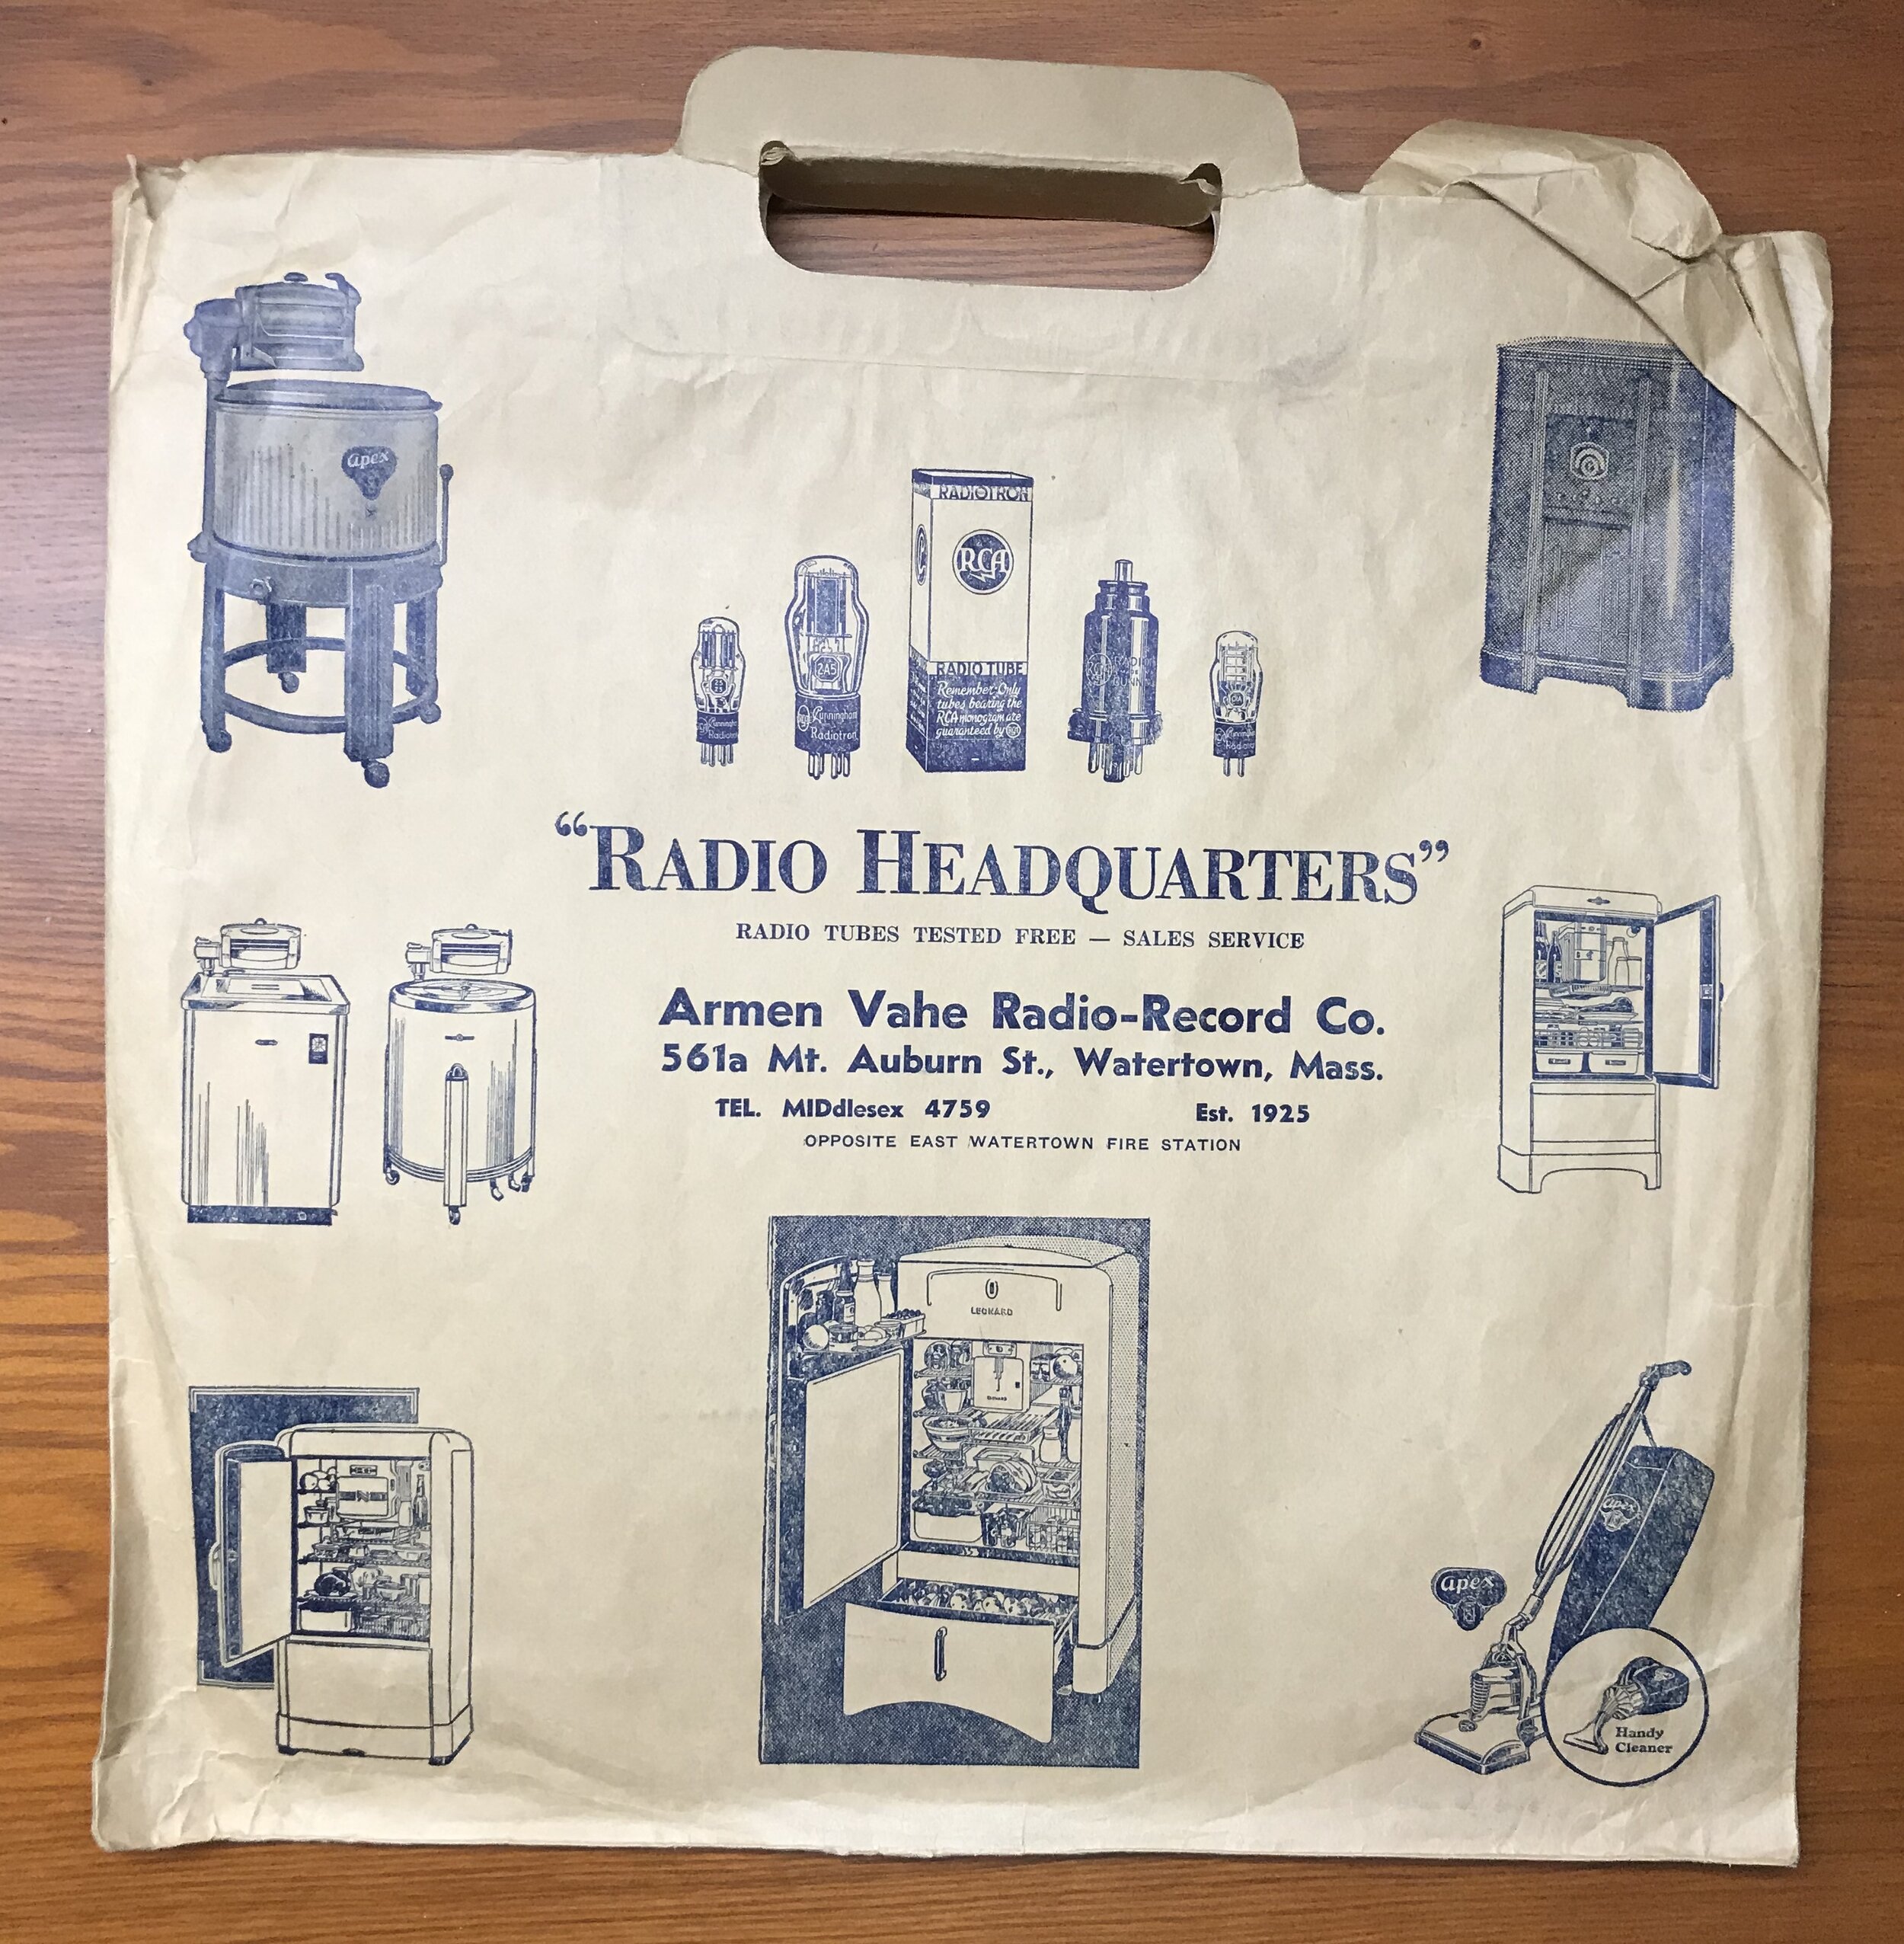  A custom shopping bag from Armen Vahe Radio-Record Co. in Watertown, MA (Image: Armenian Museum) 